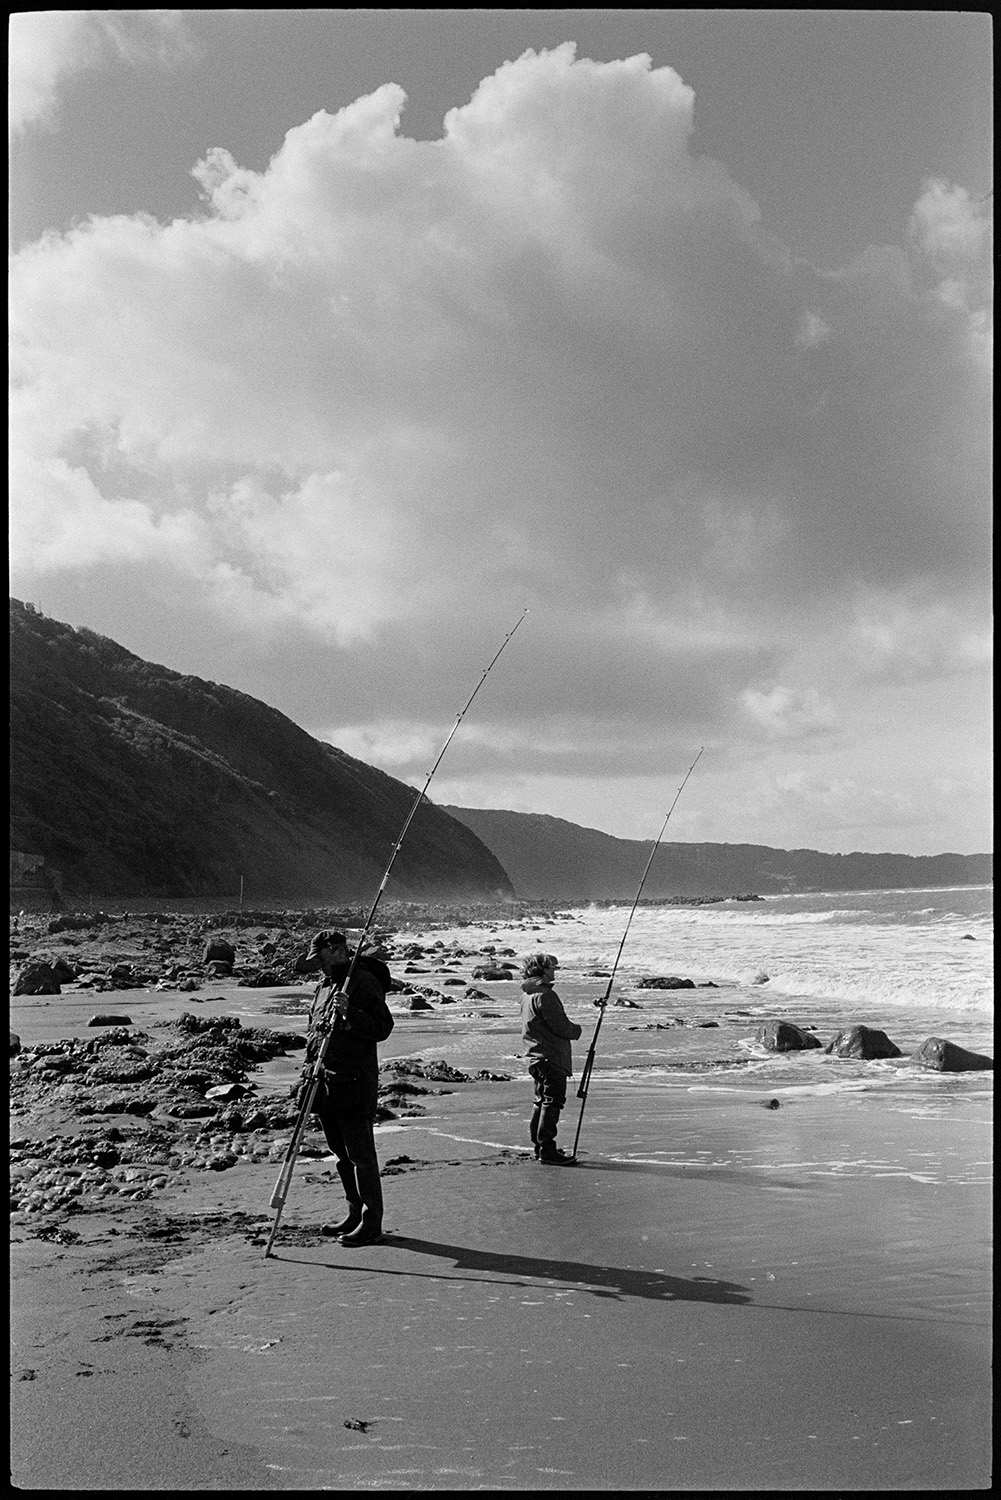 Seaside, beach with shells on rocks, limpets. 
[Two people fishing with fishing rods on the shoreline at Bucks Mills. Rocks can be seen on the beach and cliffs are visible in the background.]